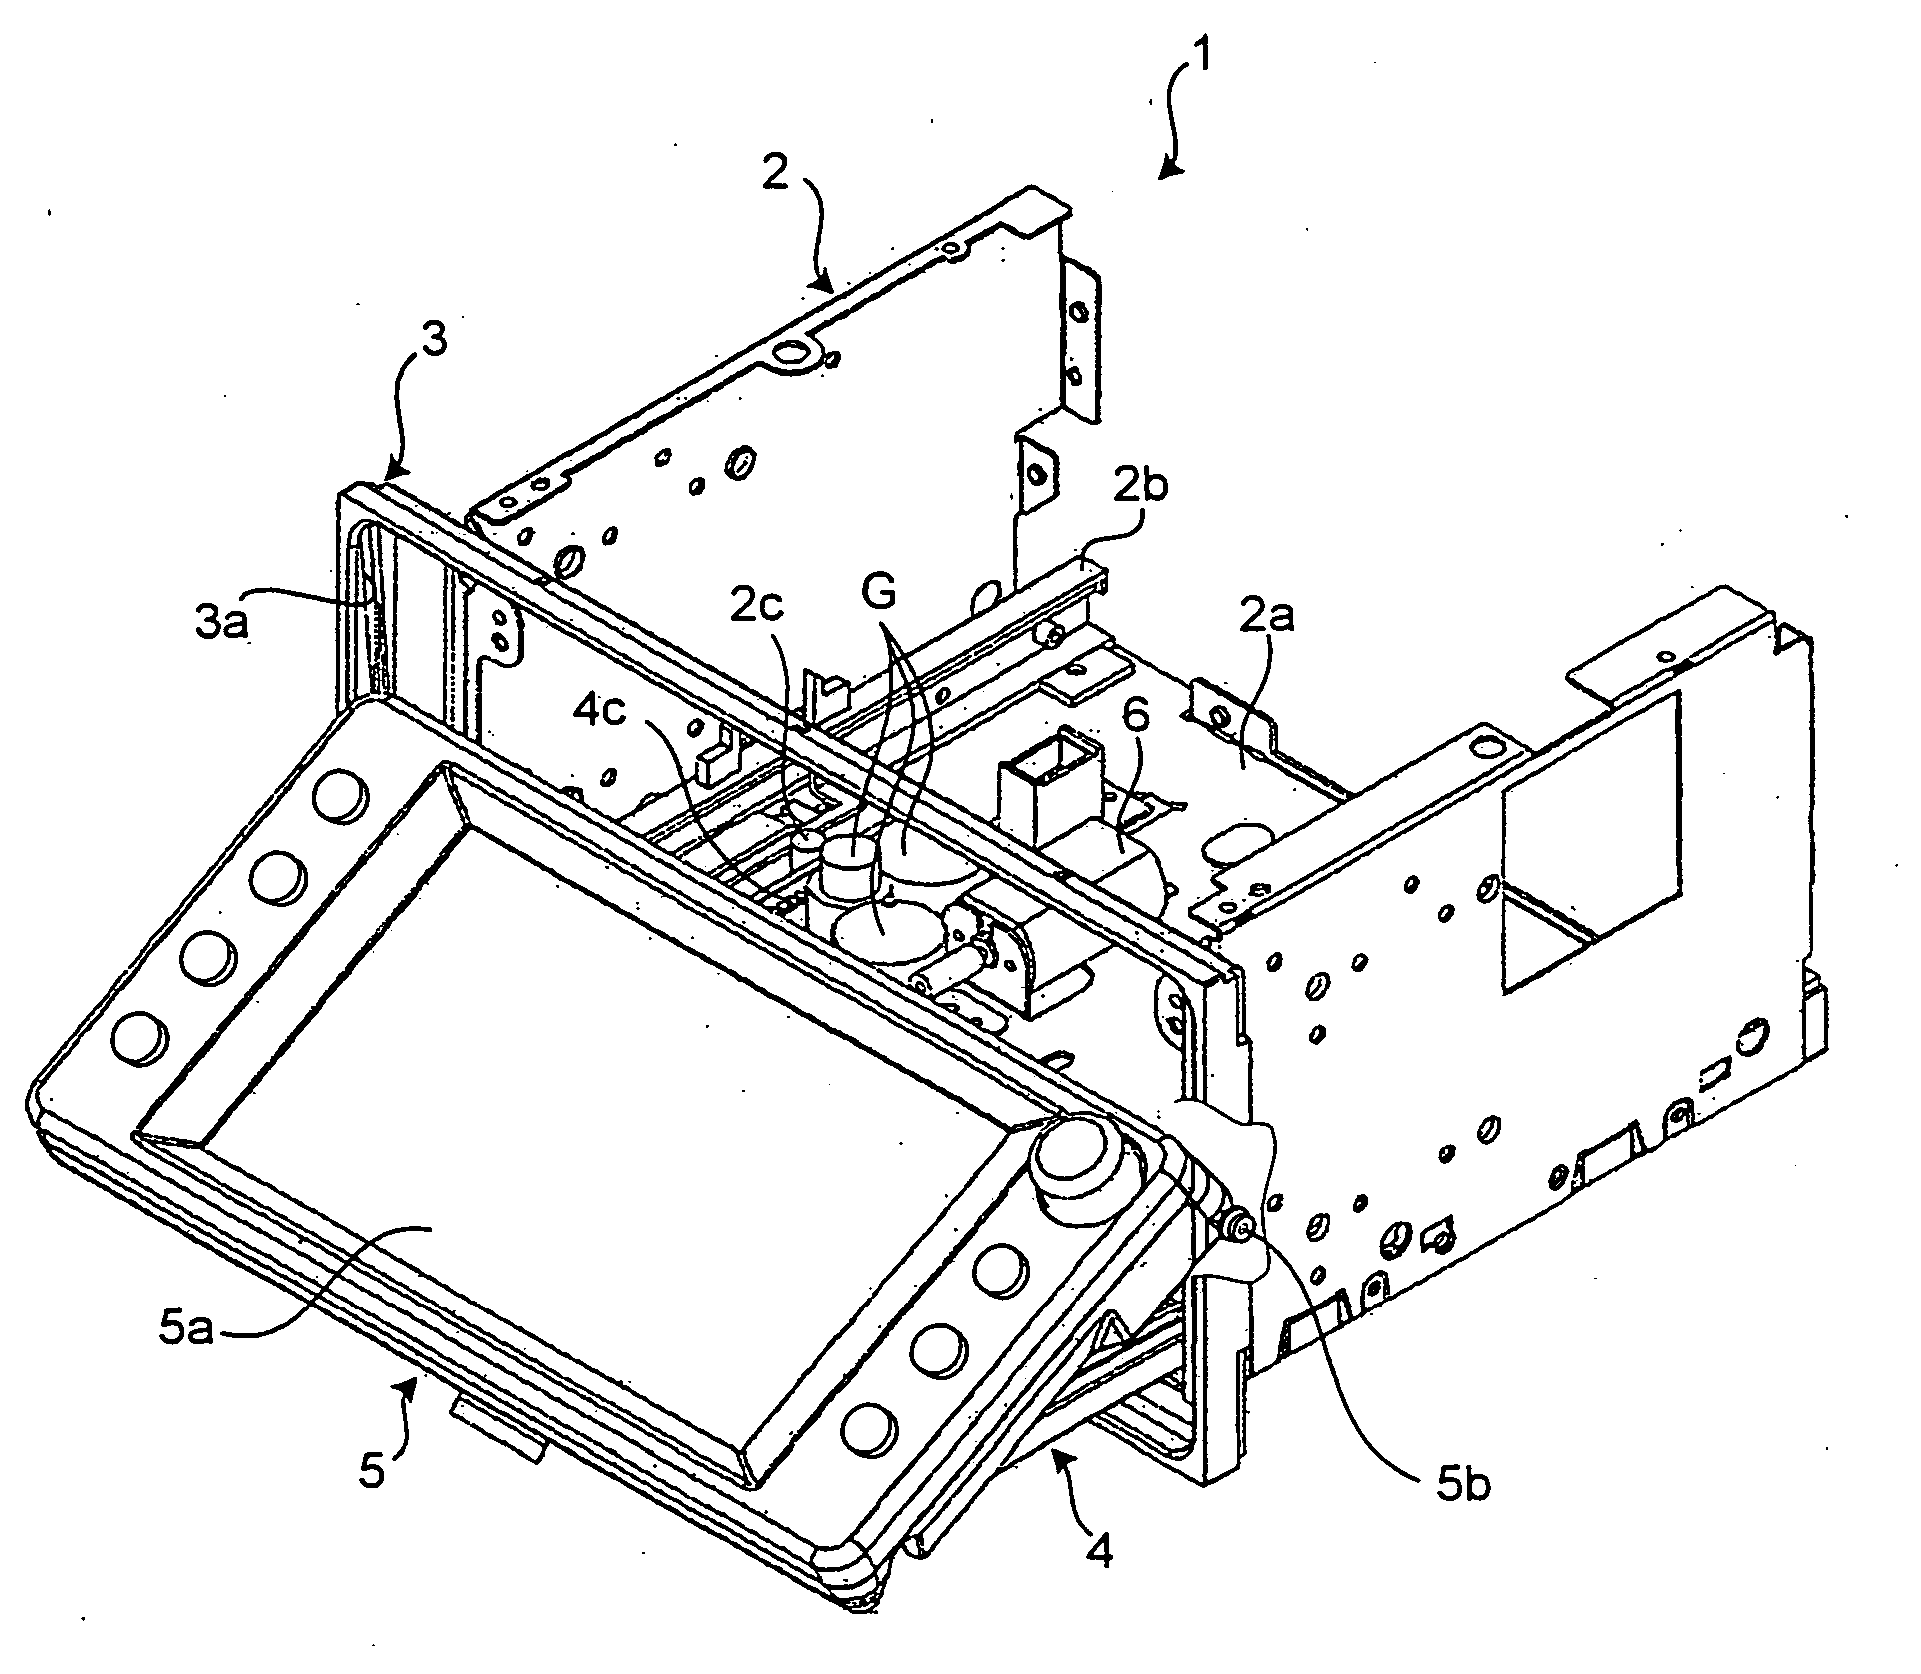 In-vehicle display apparatus